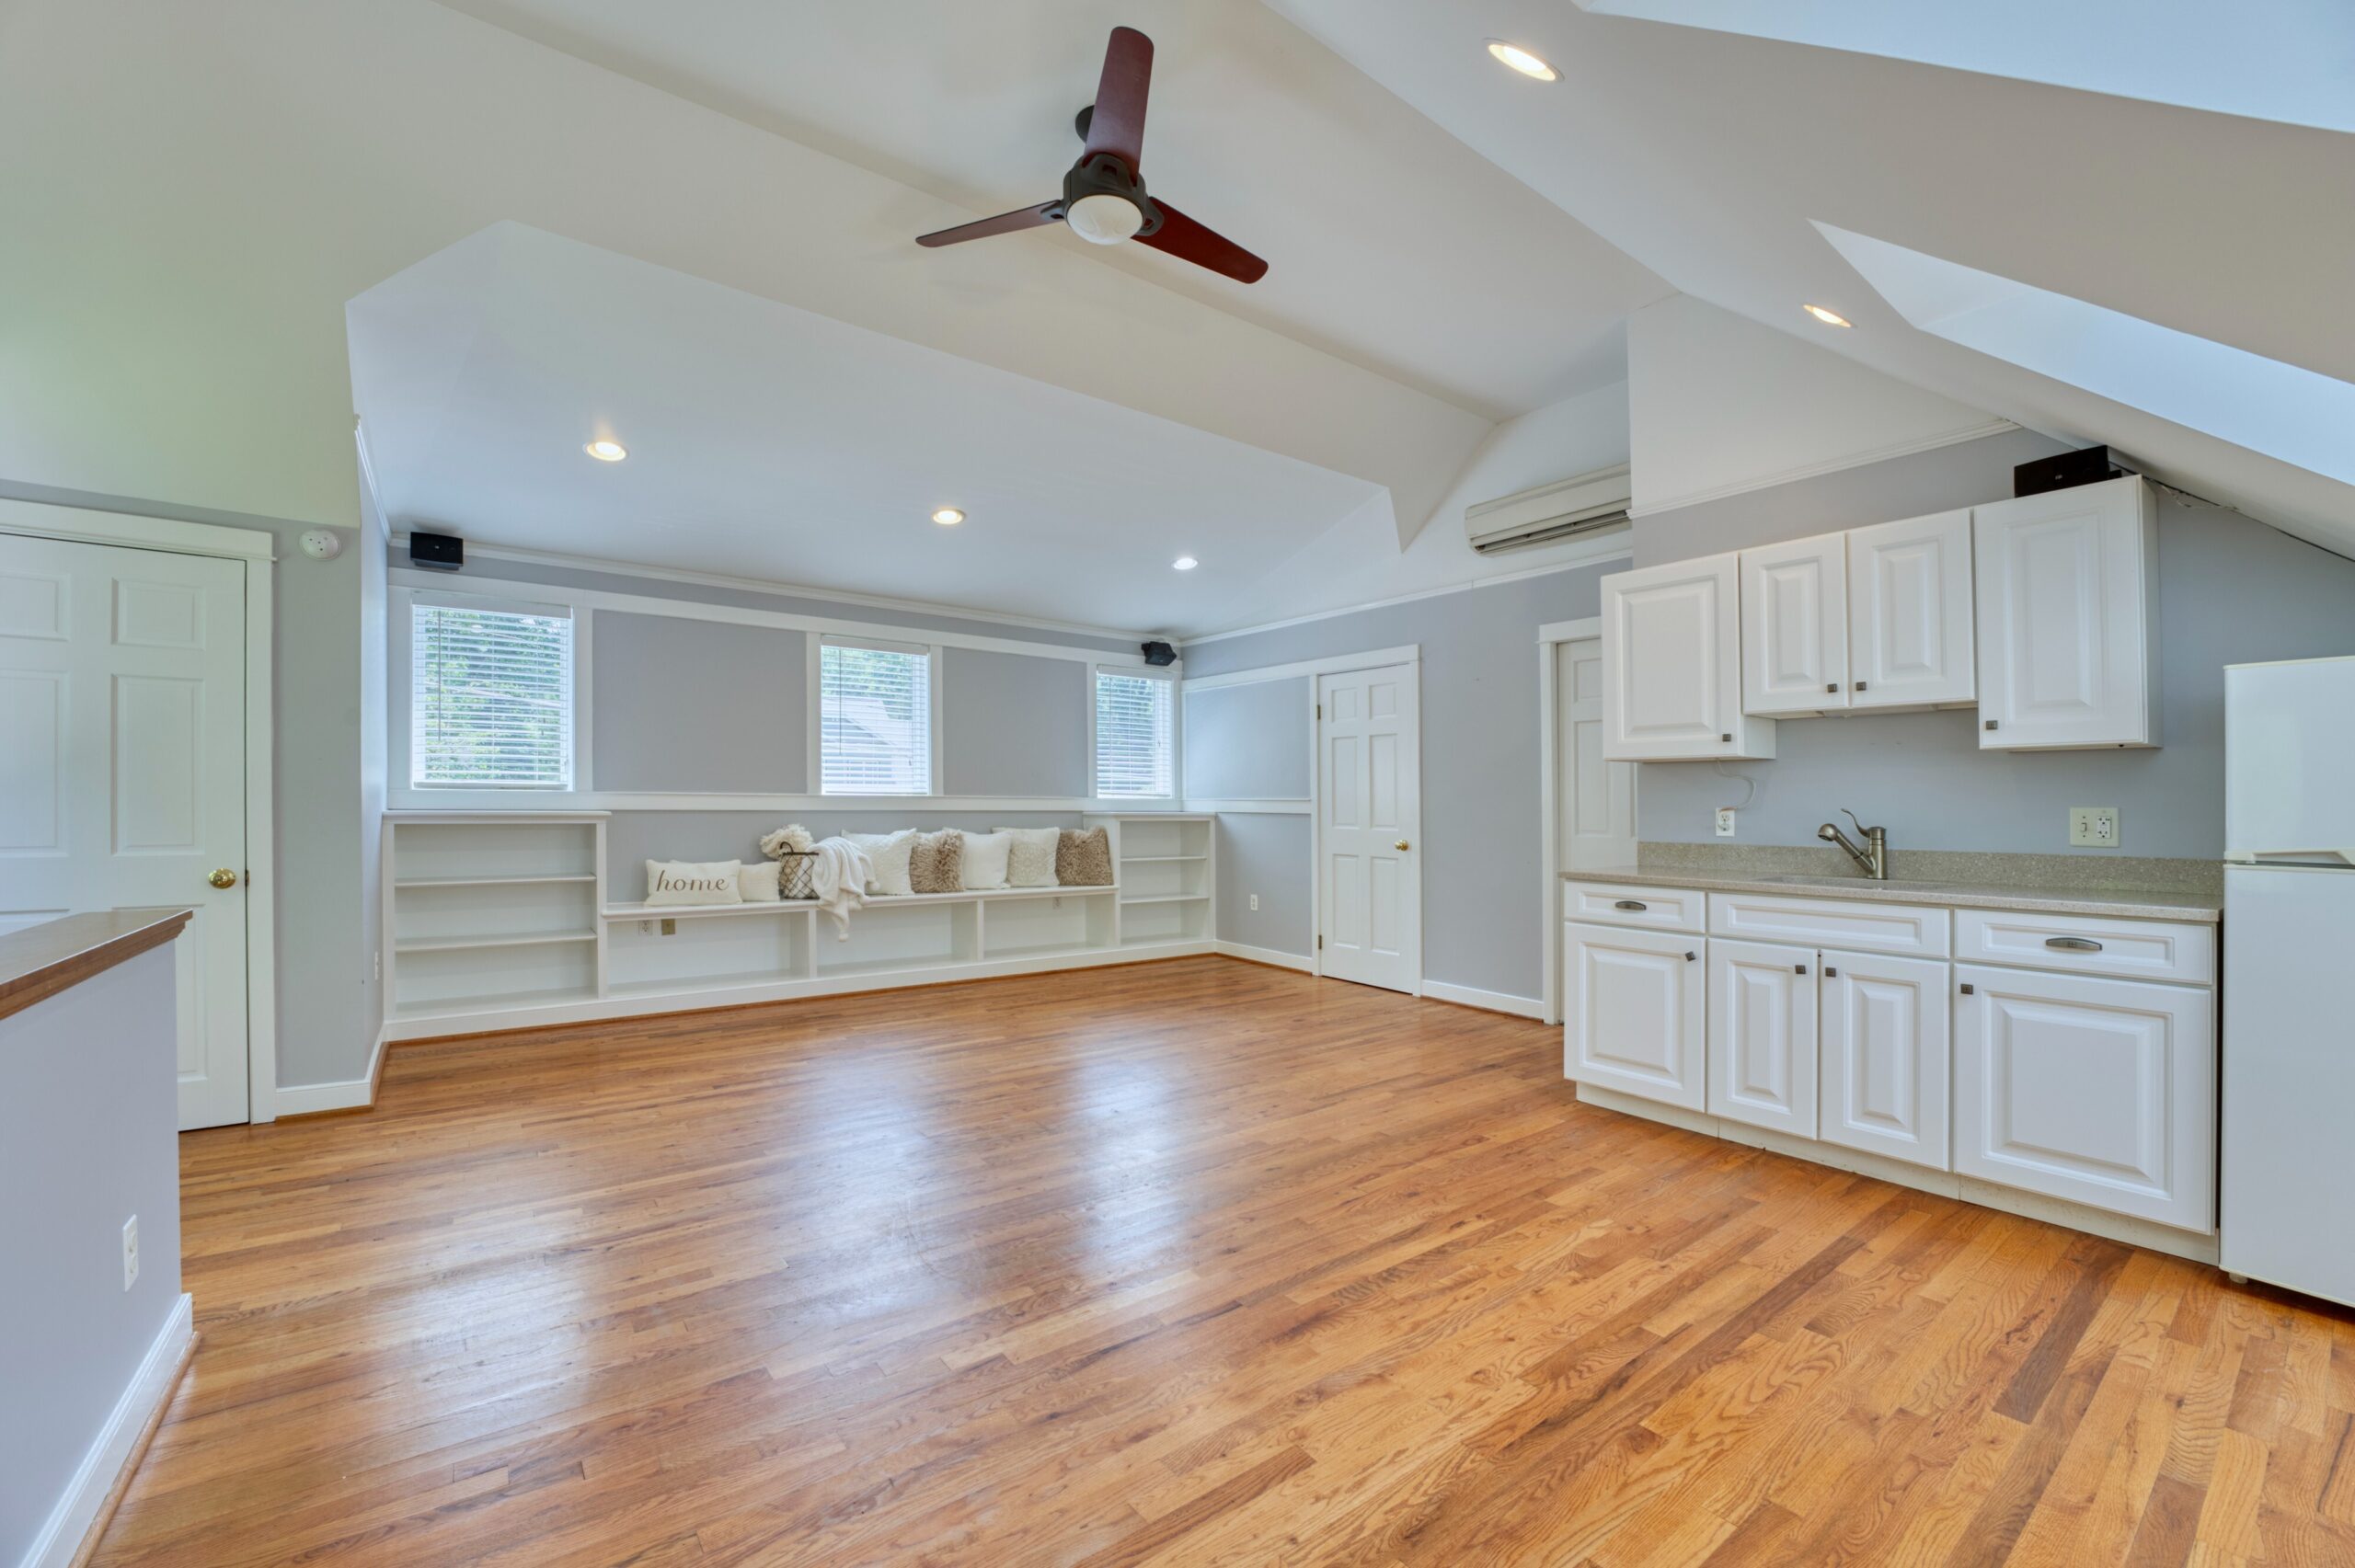 professional interior photo of 3132 Sleepy Hollow Road - showing the upper bonus room with built-in wet bar, shelves, and vaulted ceiling with ceiling fan and skylights over bamboo floors.